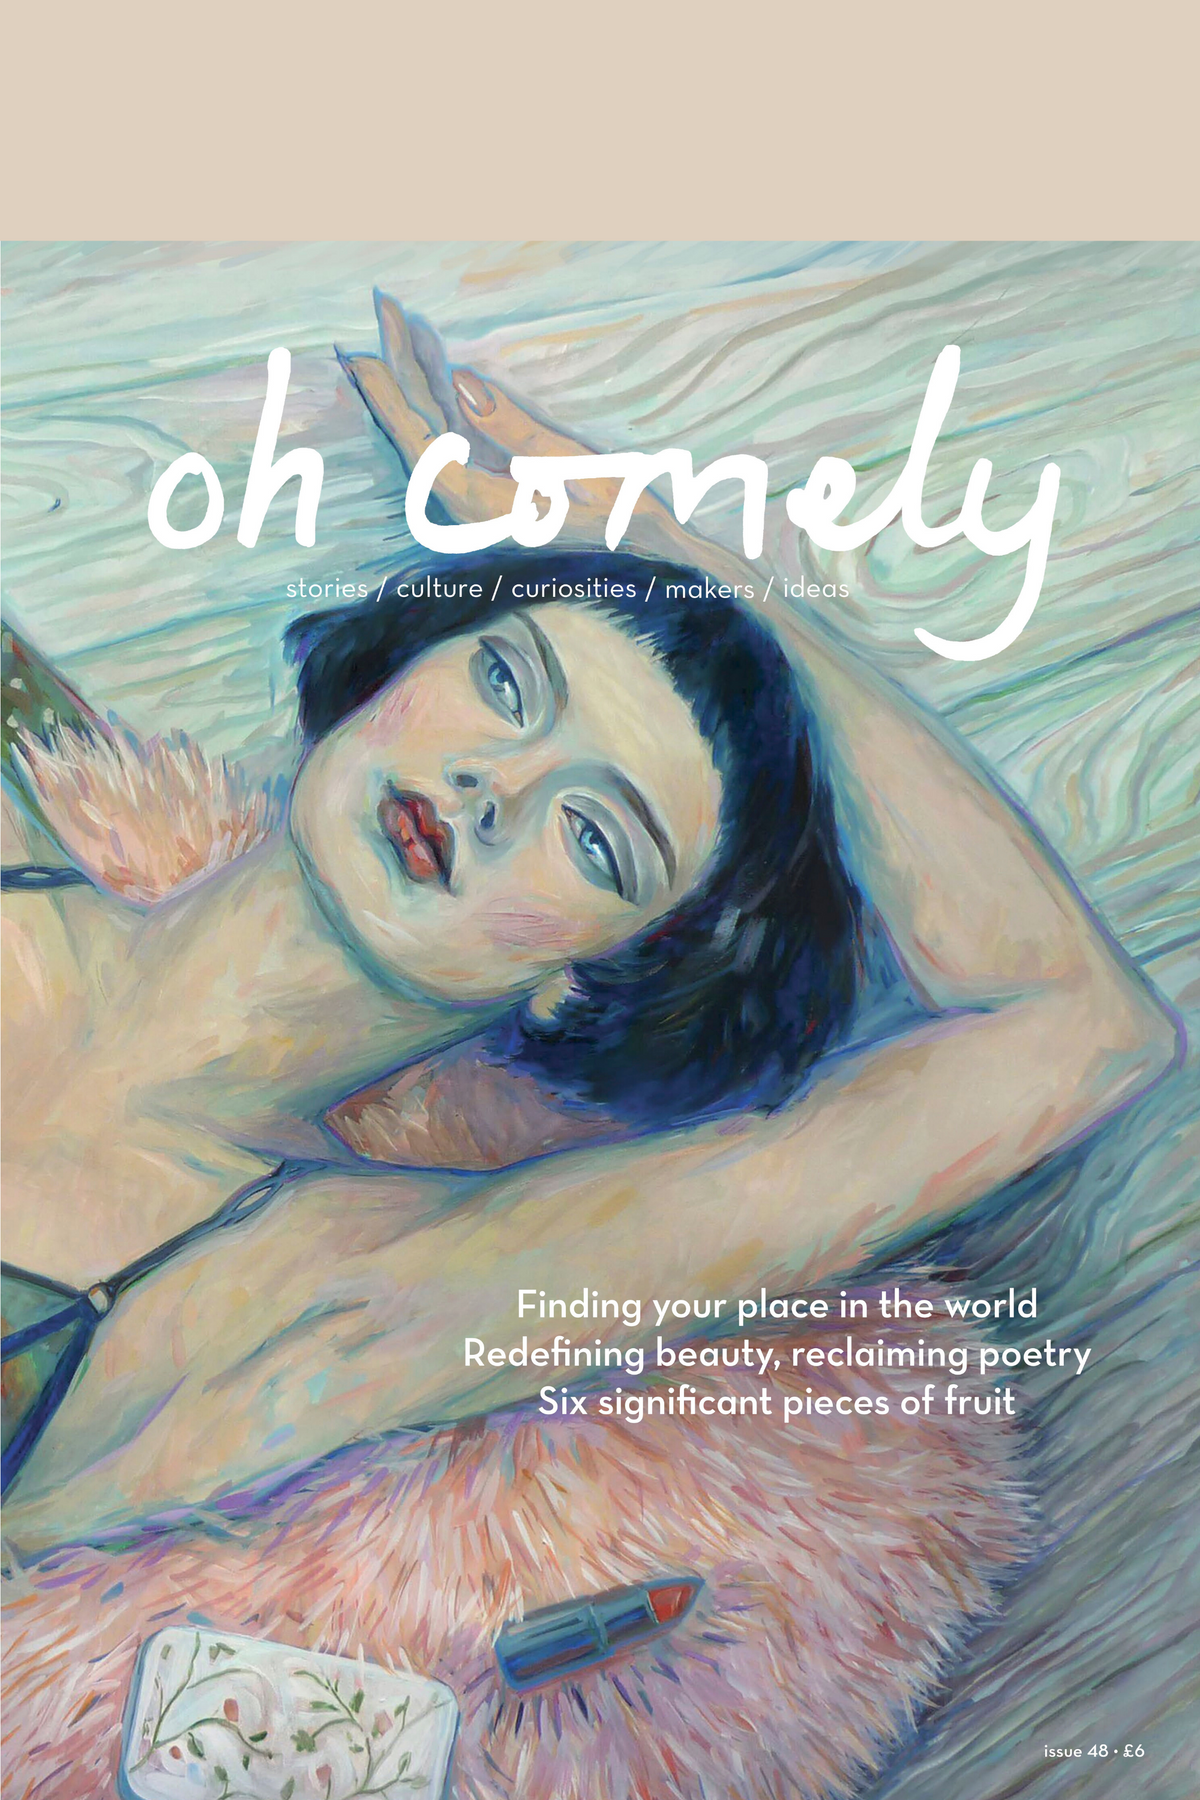 Oh Comely - Issue 48